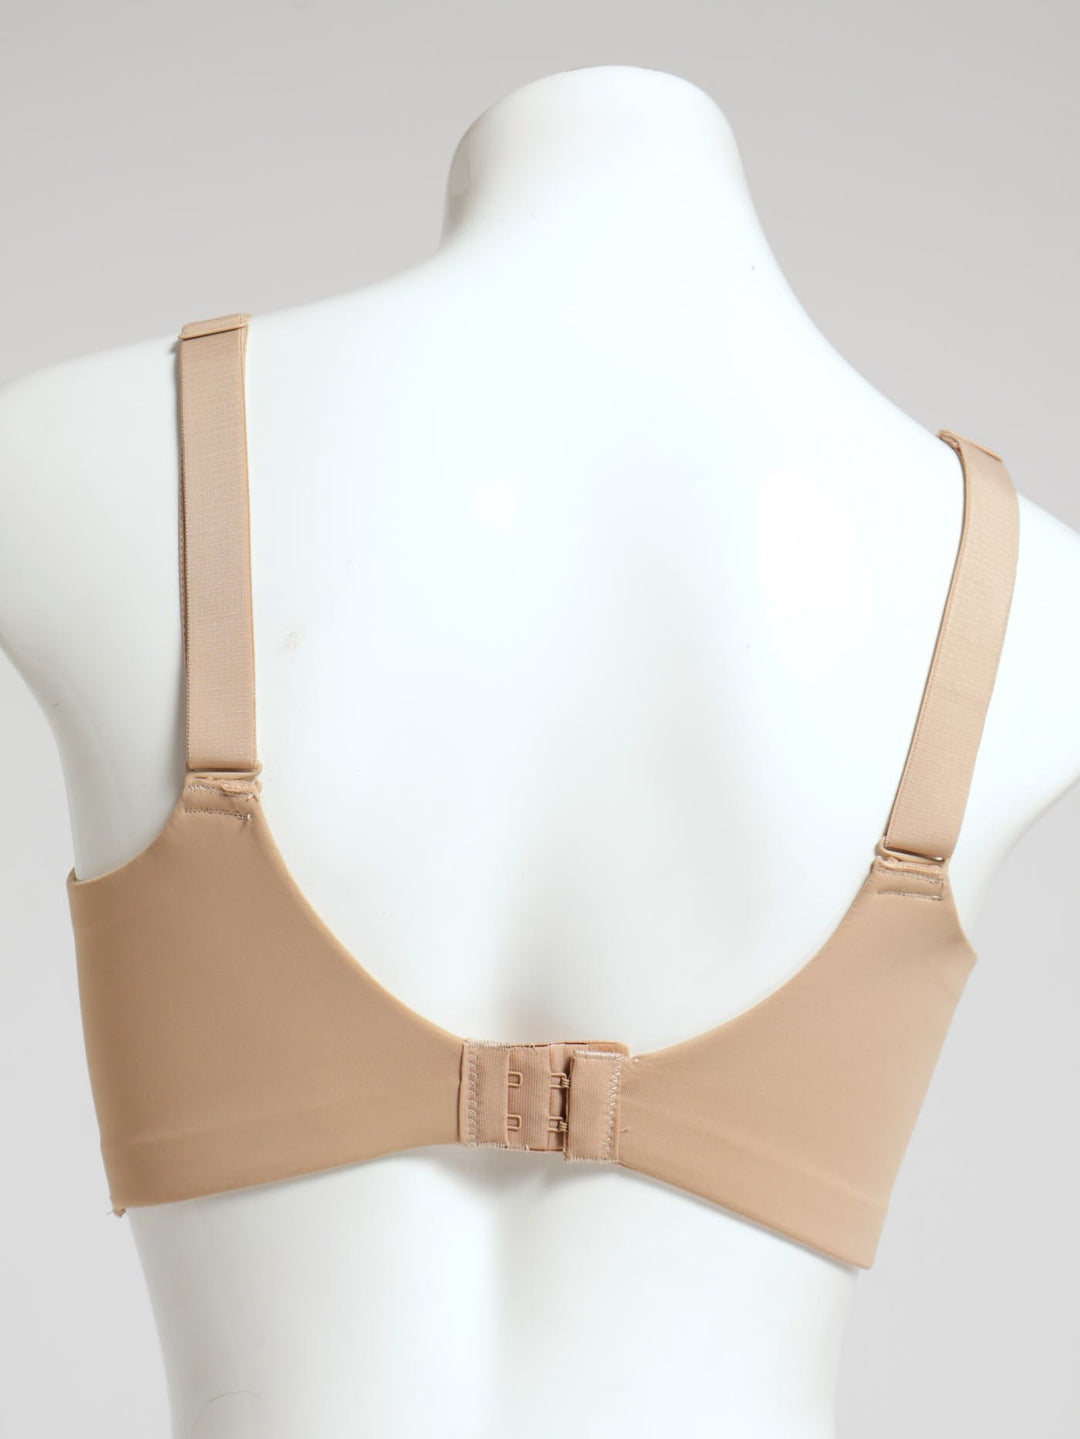 Soft Touch Total Support Bra - Beige